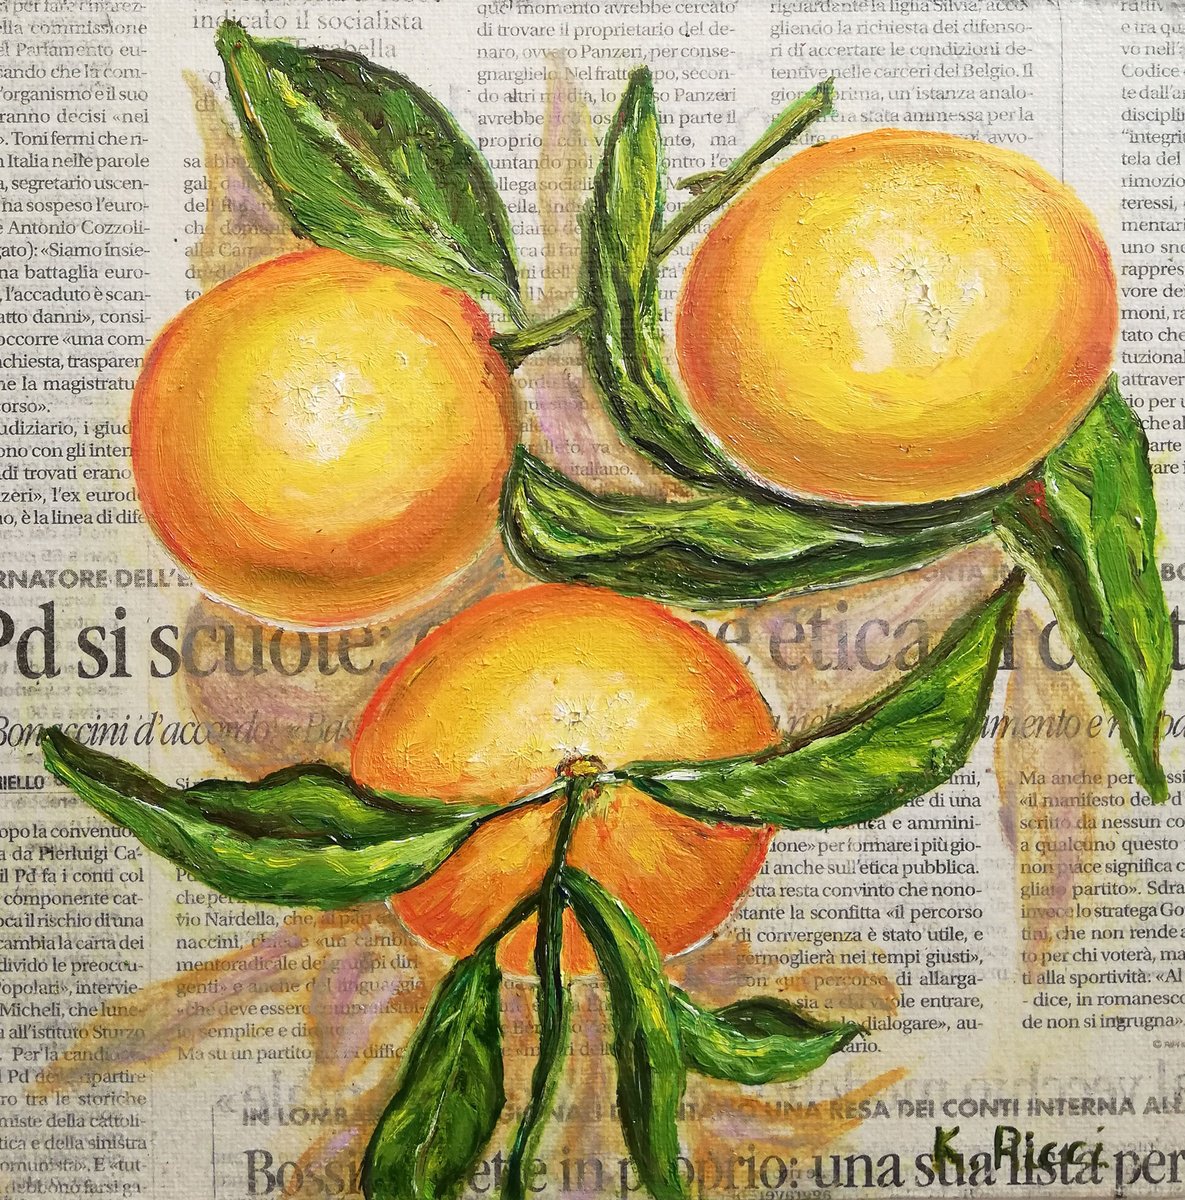 Oranges on Newspaper Original Oil on Canvas Board Painting 8 by 8 inches (20x20 cm) by Katia Ricci